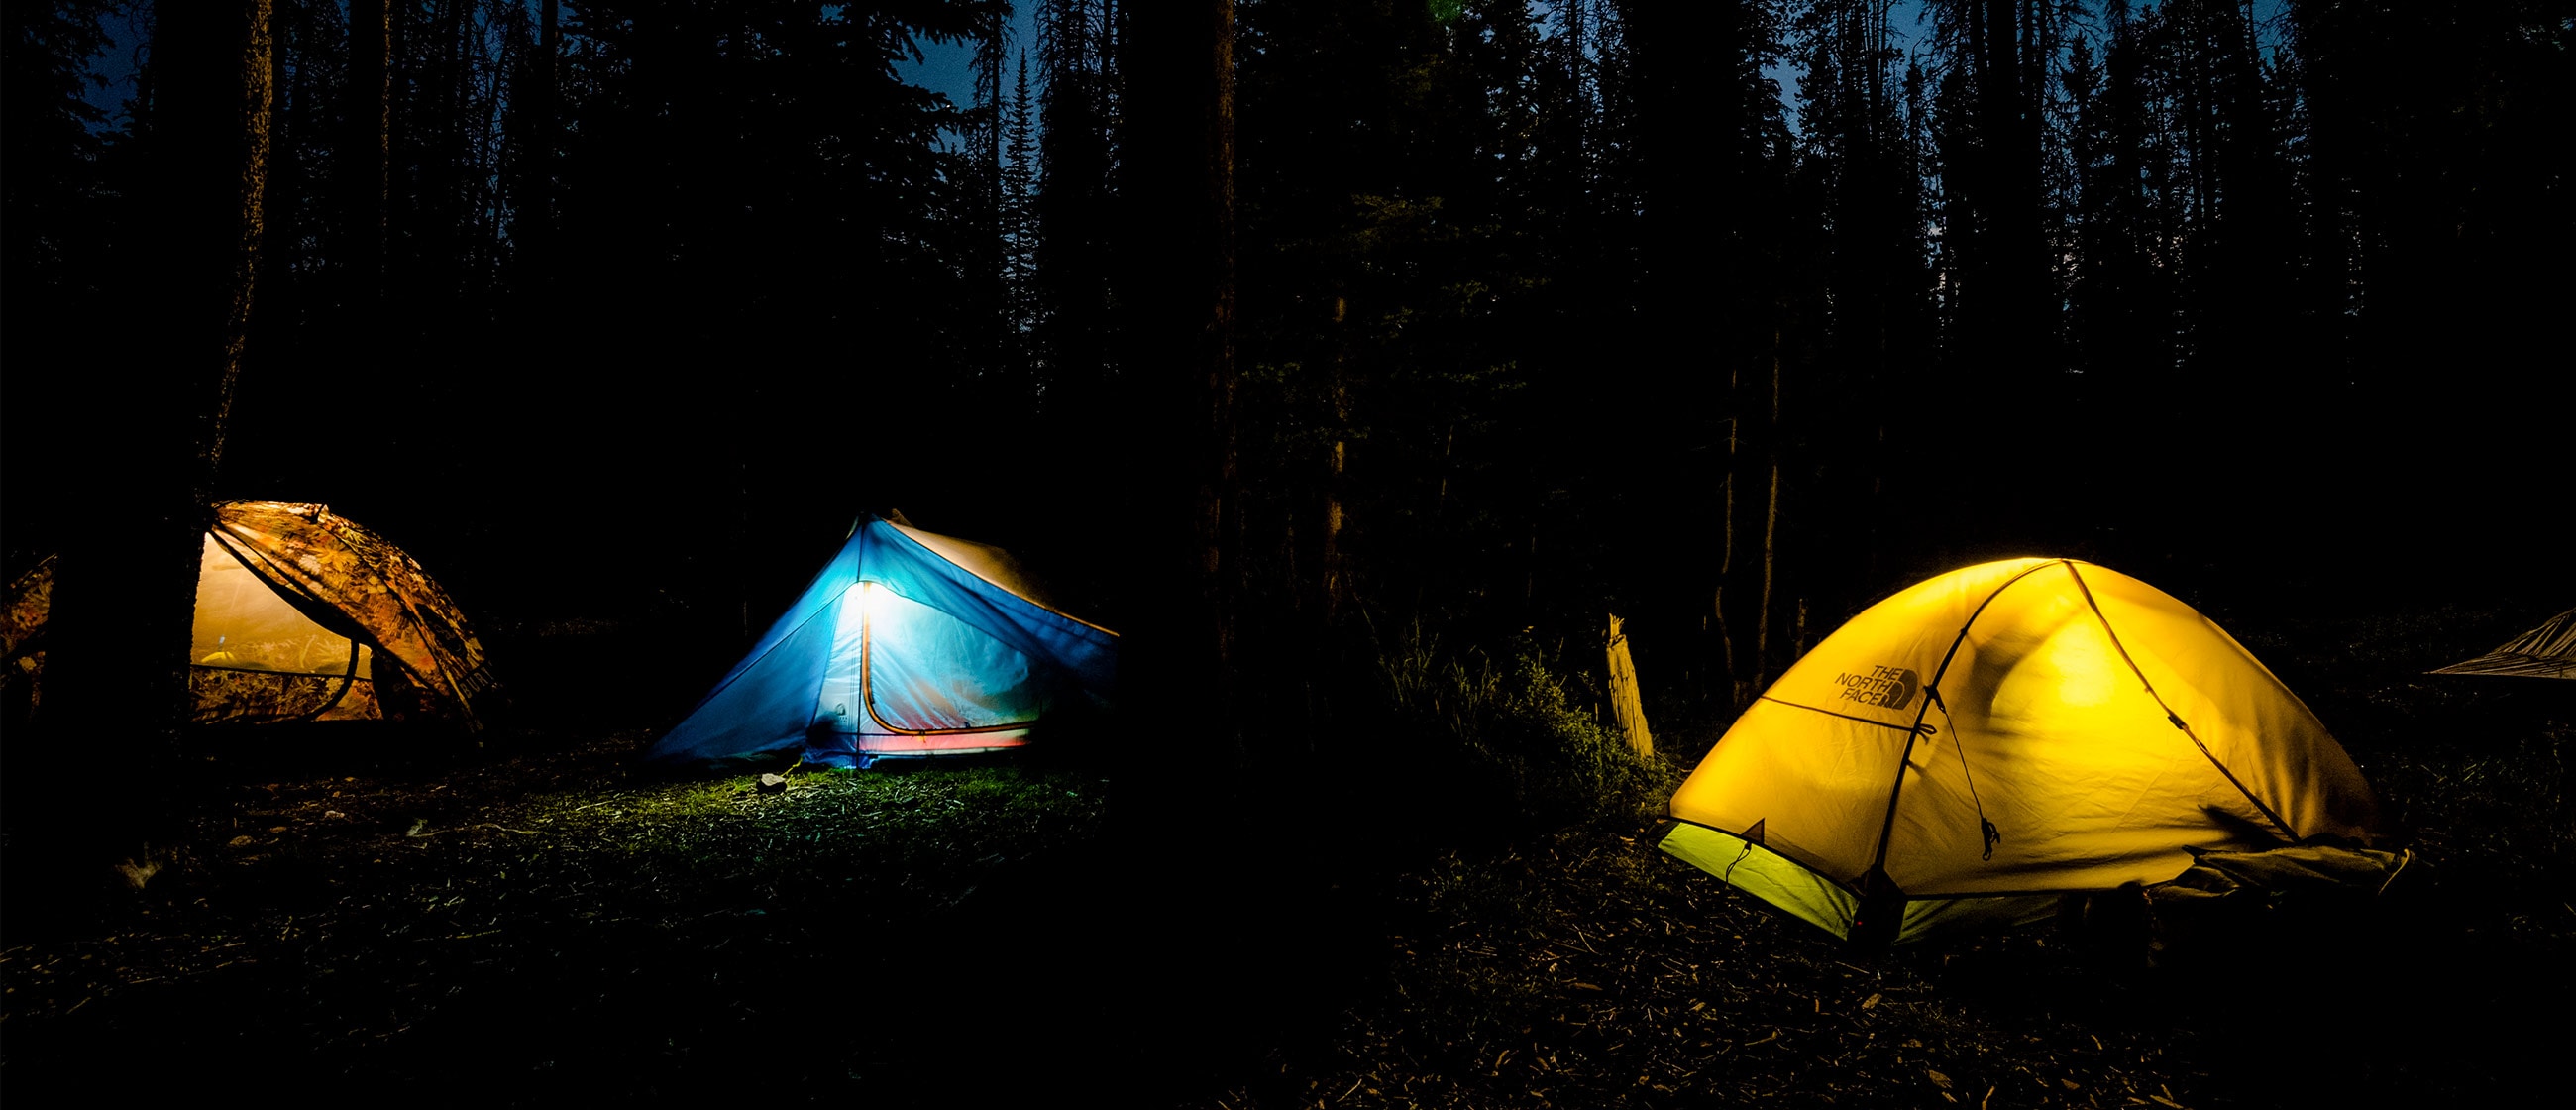 How to Choose a Camp Lantern